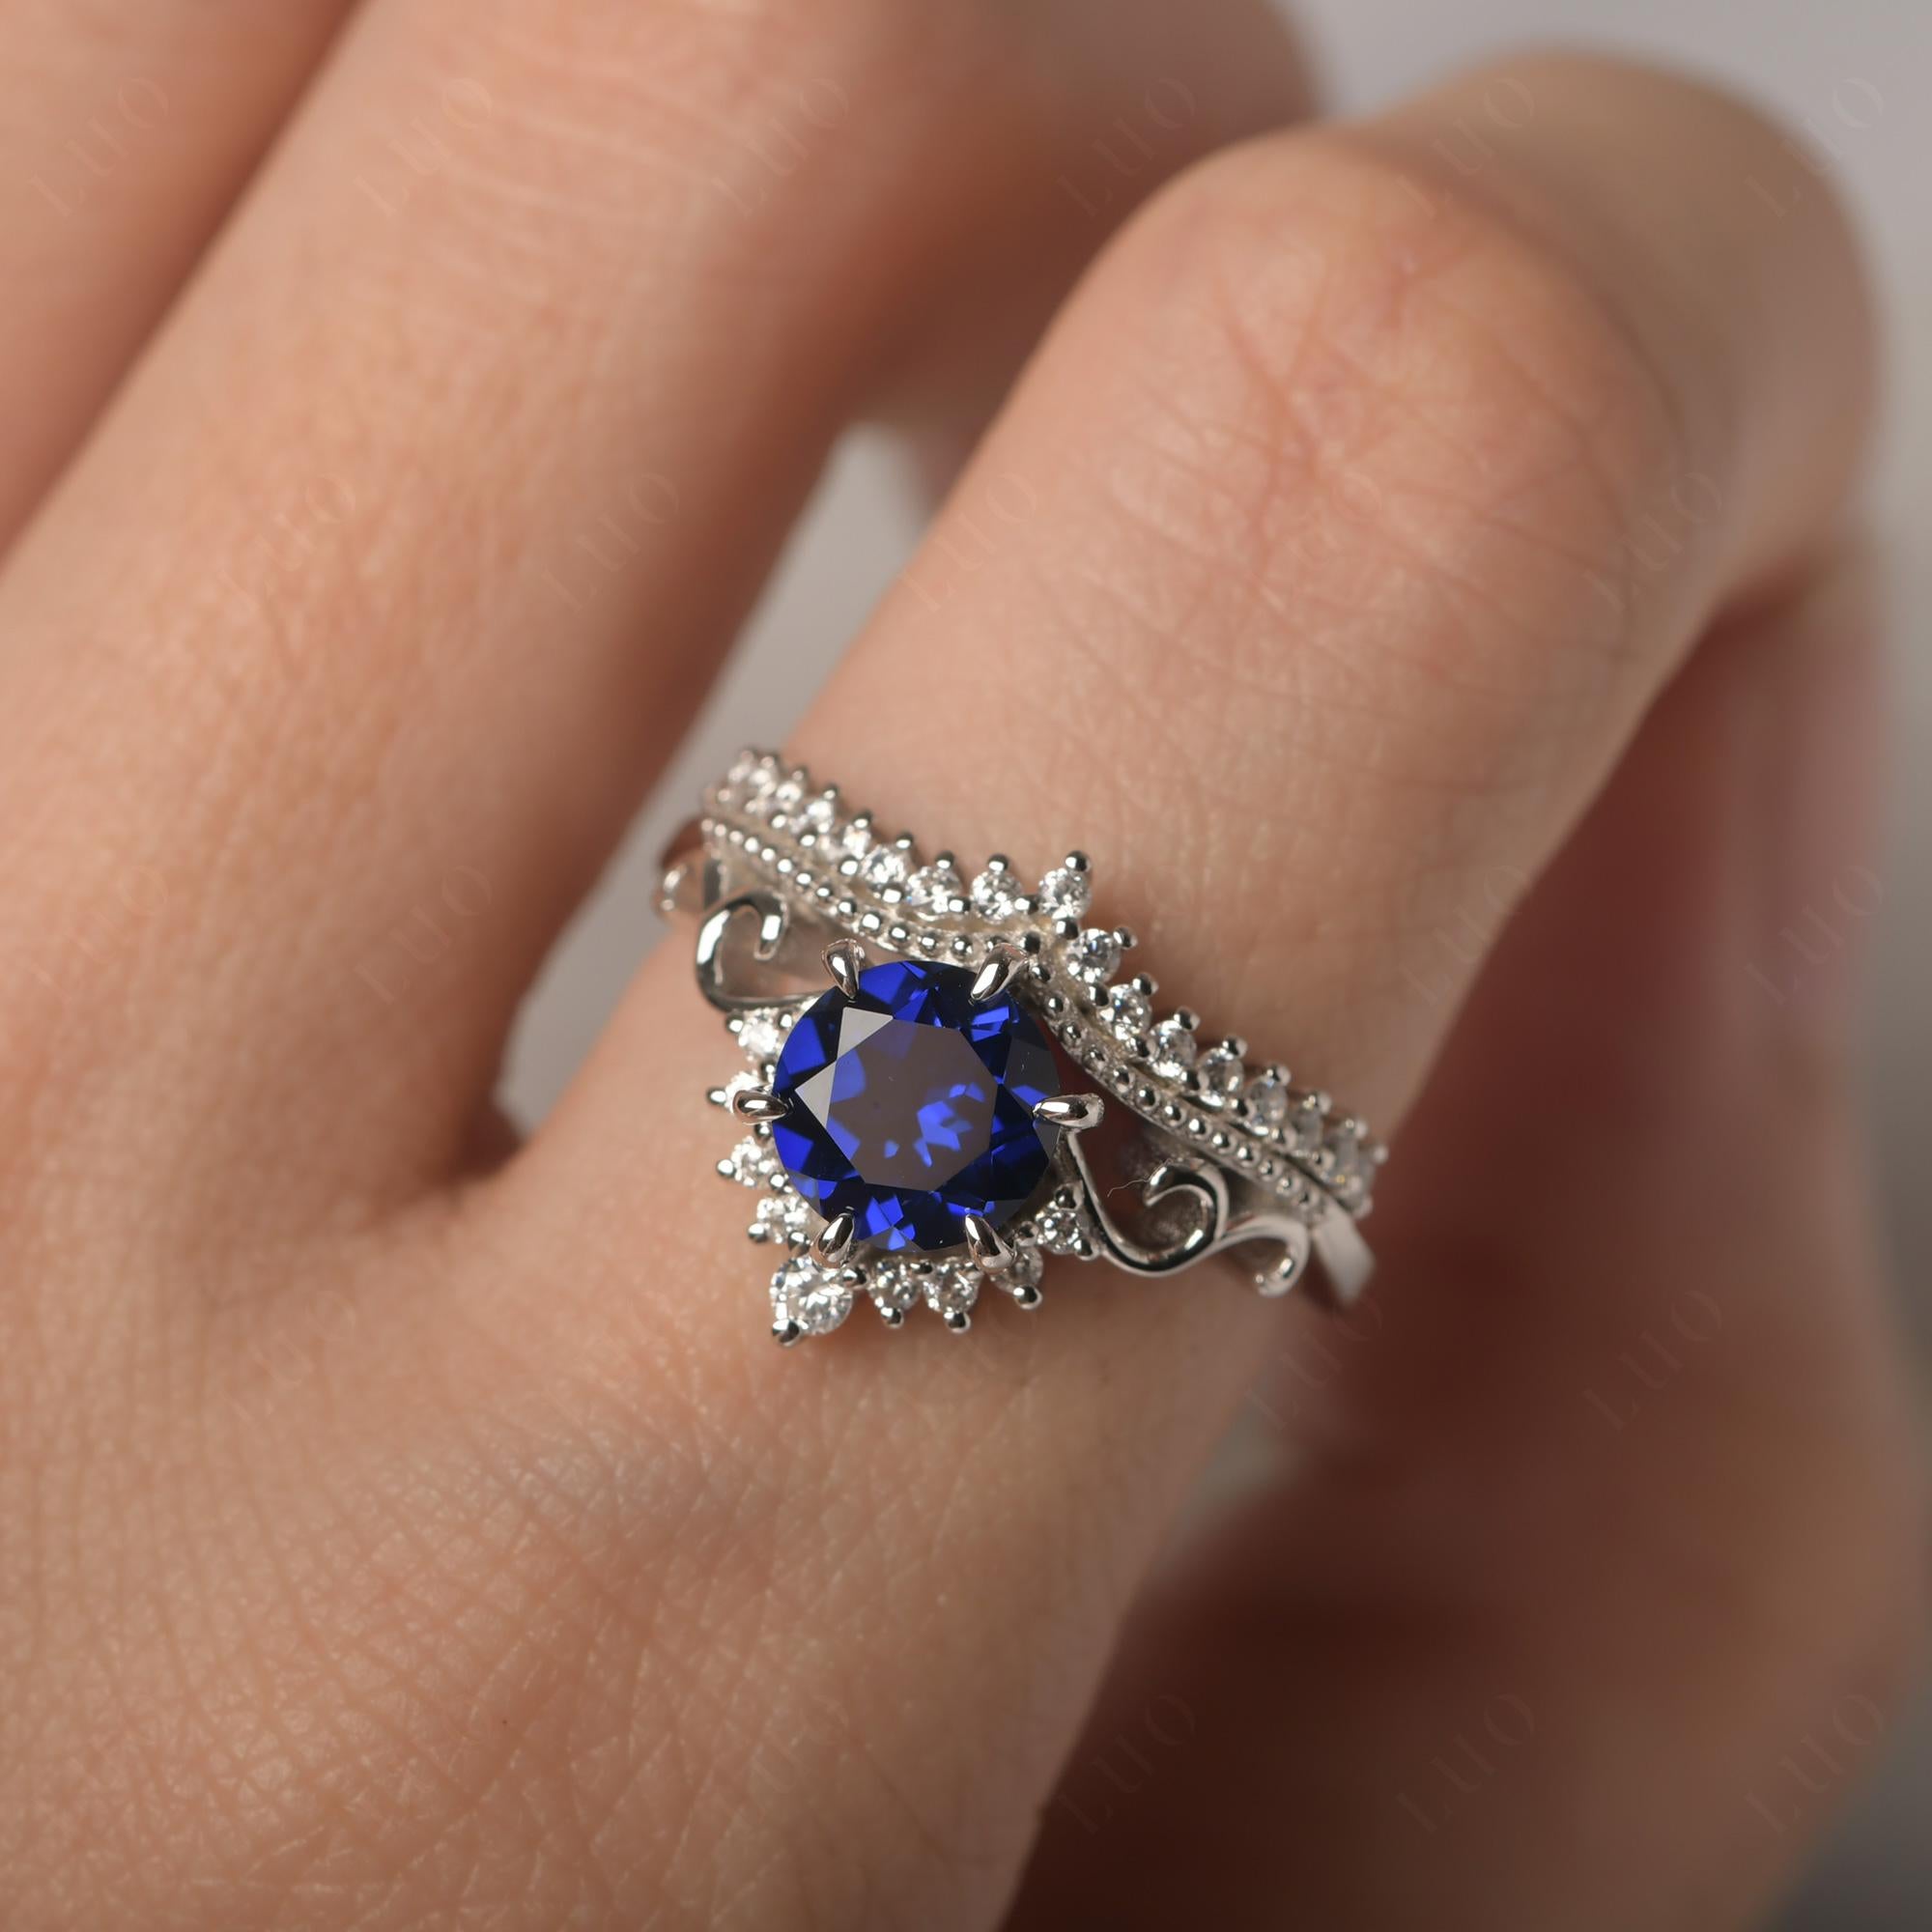 Vintage Sapphire Cocktail Ring - LUO Jewelry